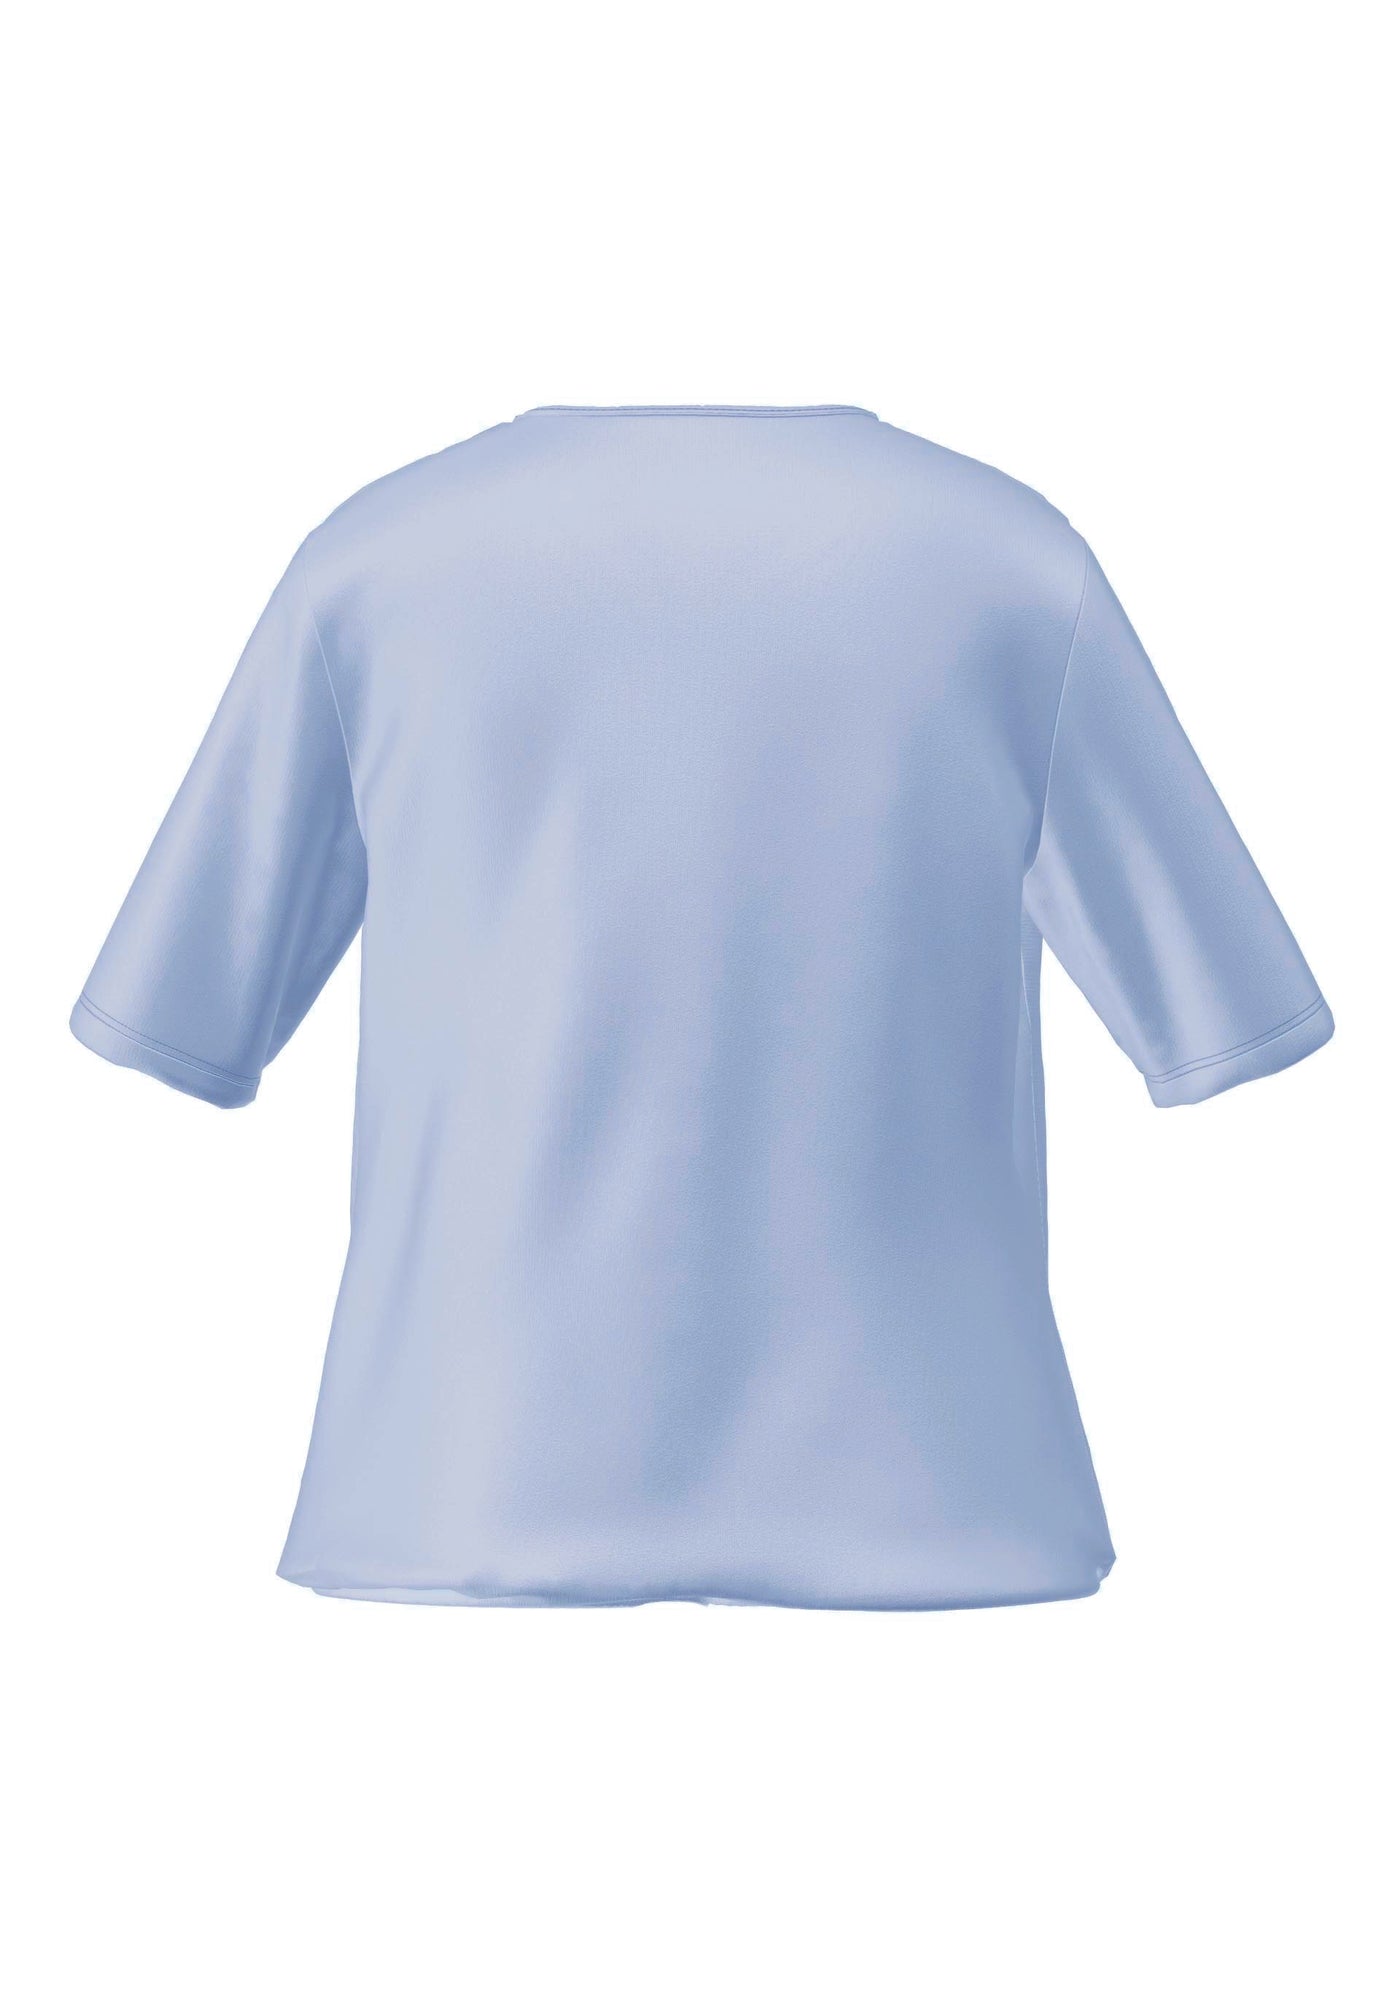 Light Blue Round Neck Tie String Top With Elasticated Hem & Short Sleeves